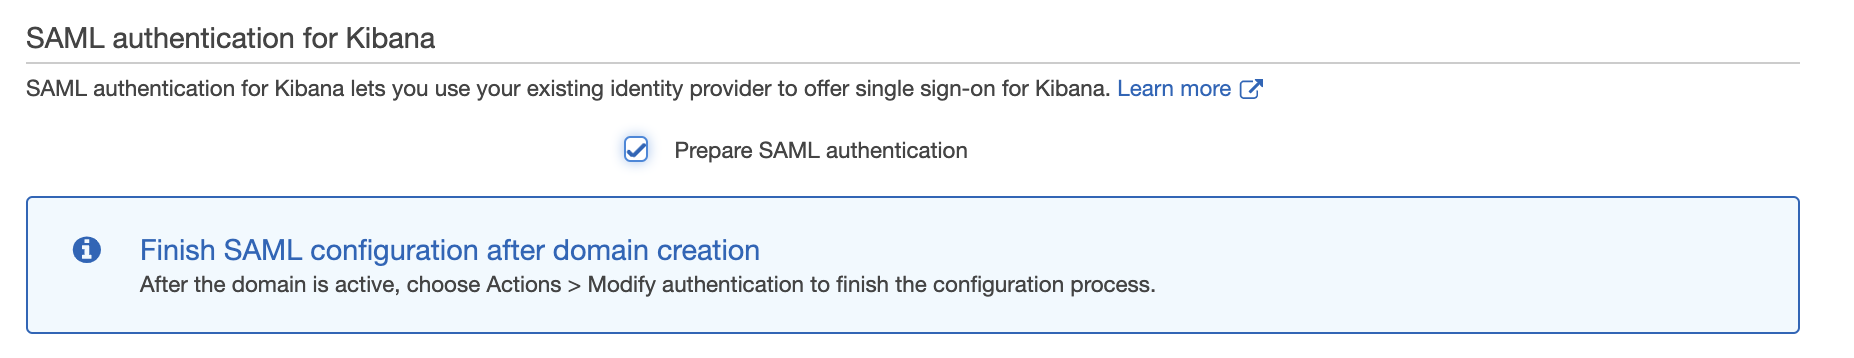 SAML authentication for Kibana

SAML authentication for Kibana lets you use your existing identity provider to offer single sign-on for Kibana. Learn more (7

7) Prepare SAML authentication

@ Finish SAML configuration after domain creation
After the domain is active, choose Actions > Modify authentication to finish the configuration process.